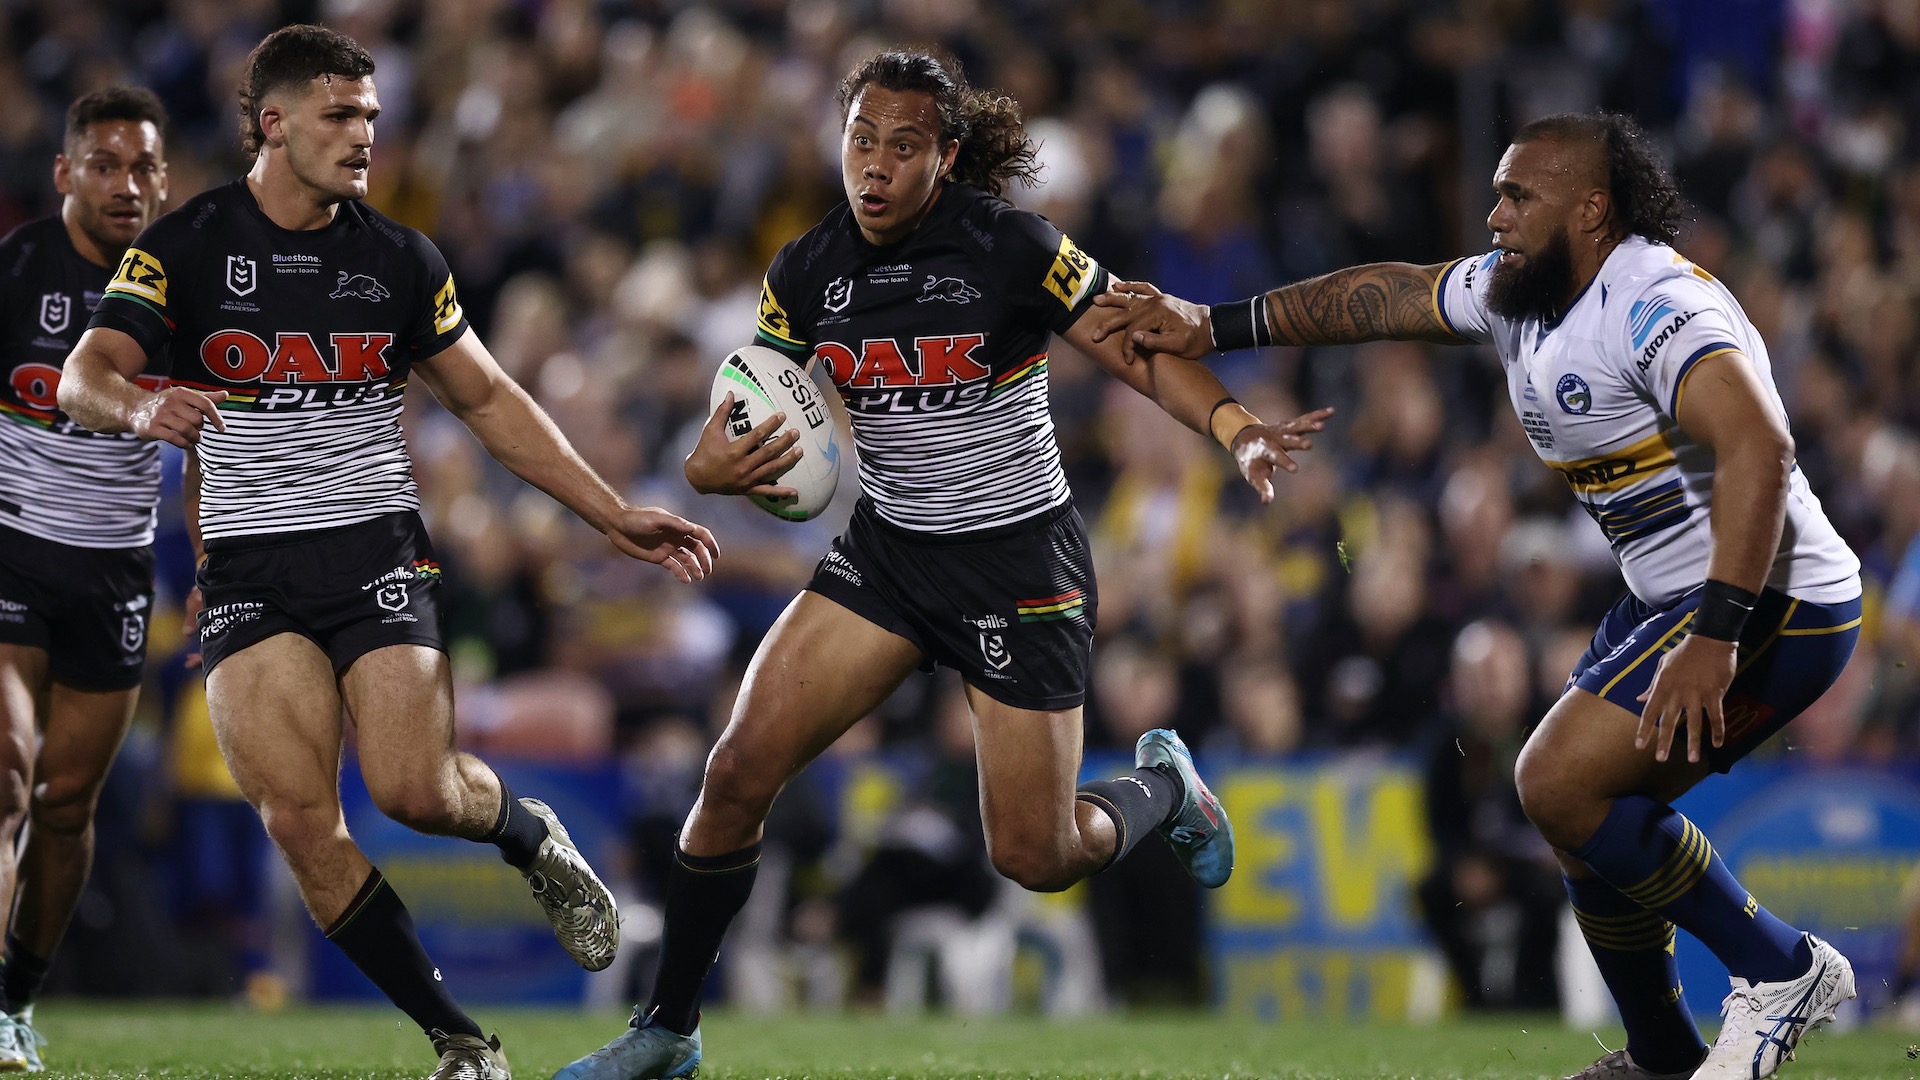 Penrith Panthers vs Parramatta Eels live stream how to watch the NRL Grand Final worldwide TechRadar